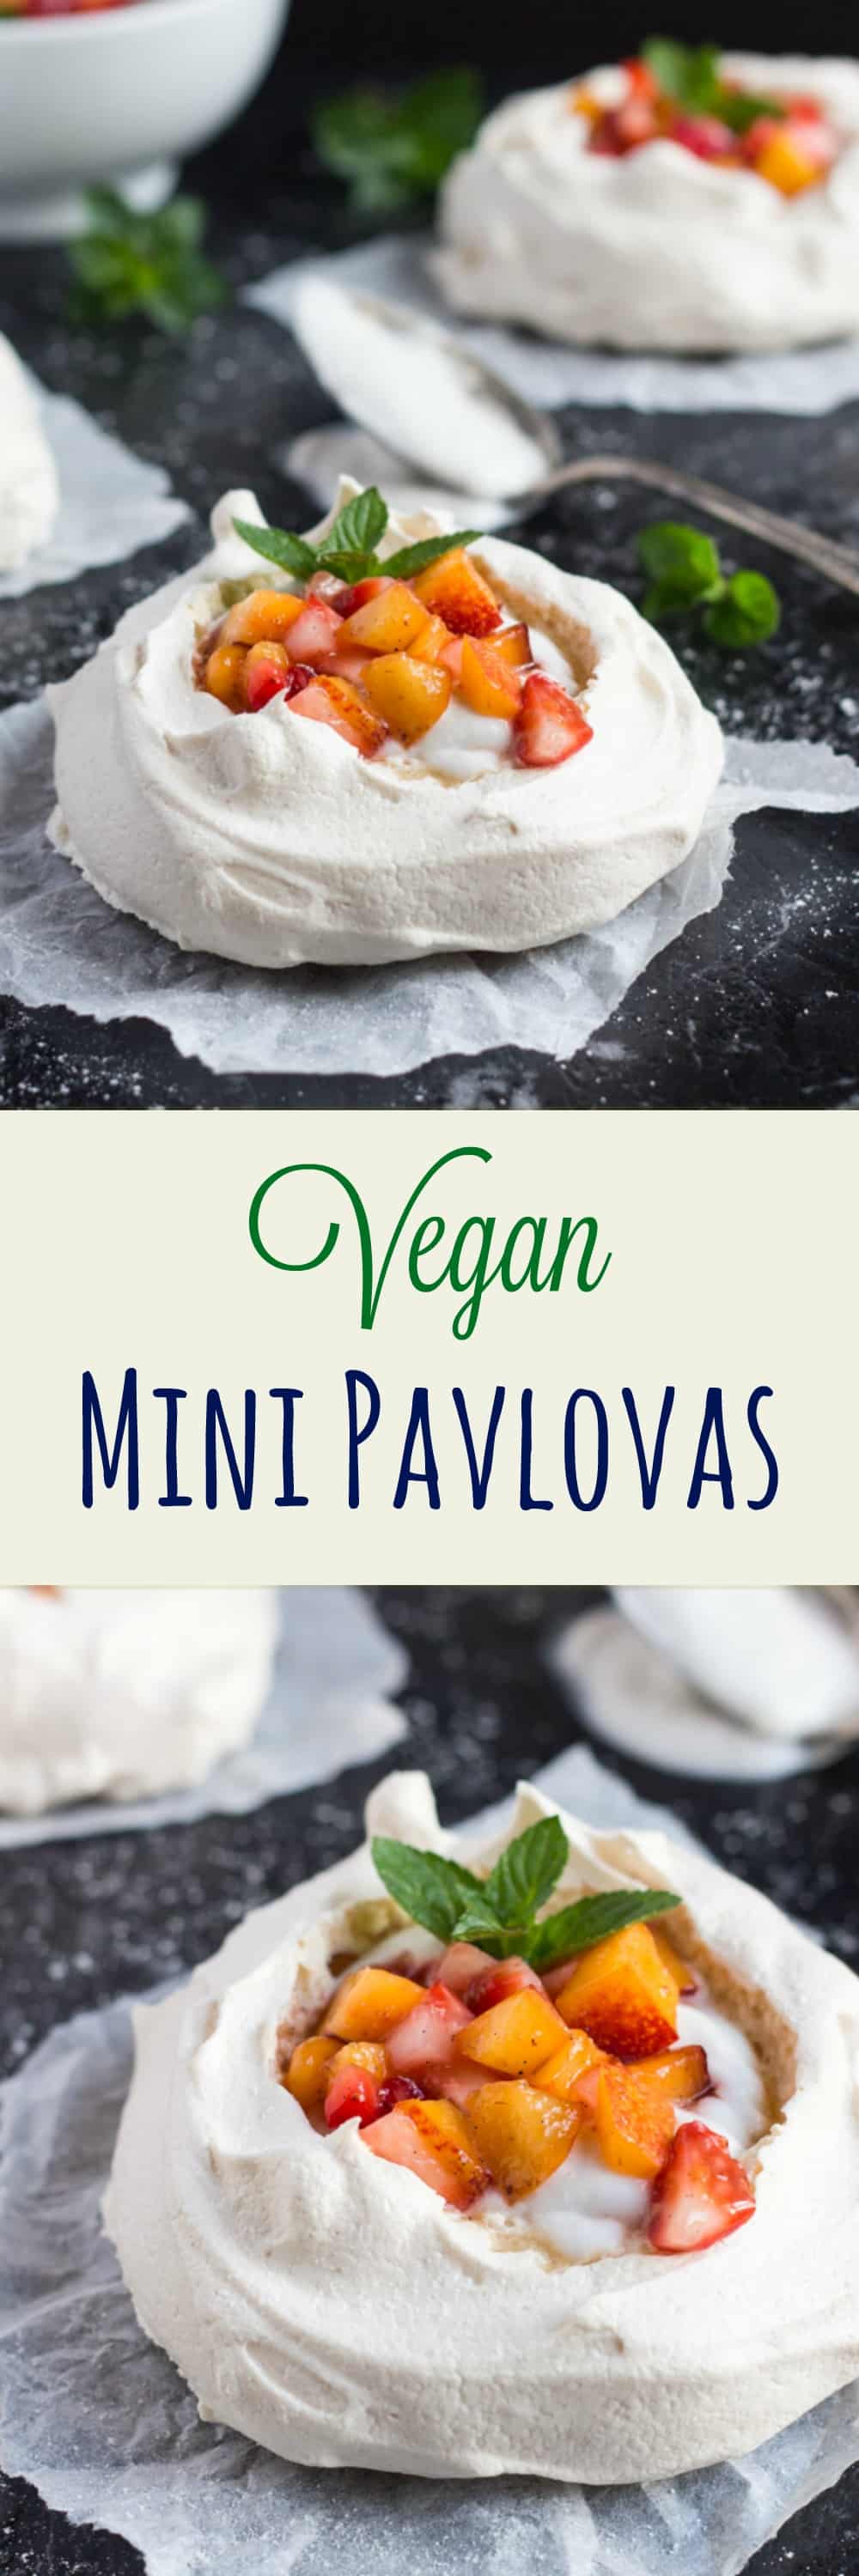 Vegan Mini Pavlovas. The perfect dessert when catering for a crowd with different dietary issues. Egg free, gluten free & vegan.